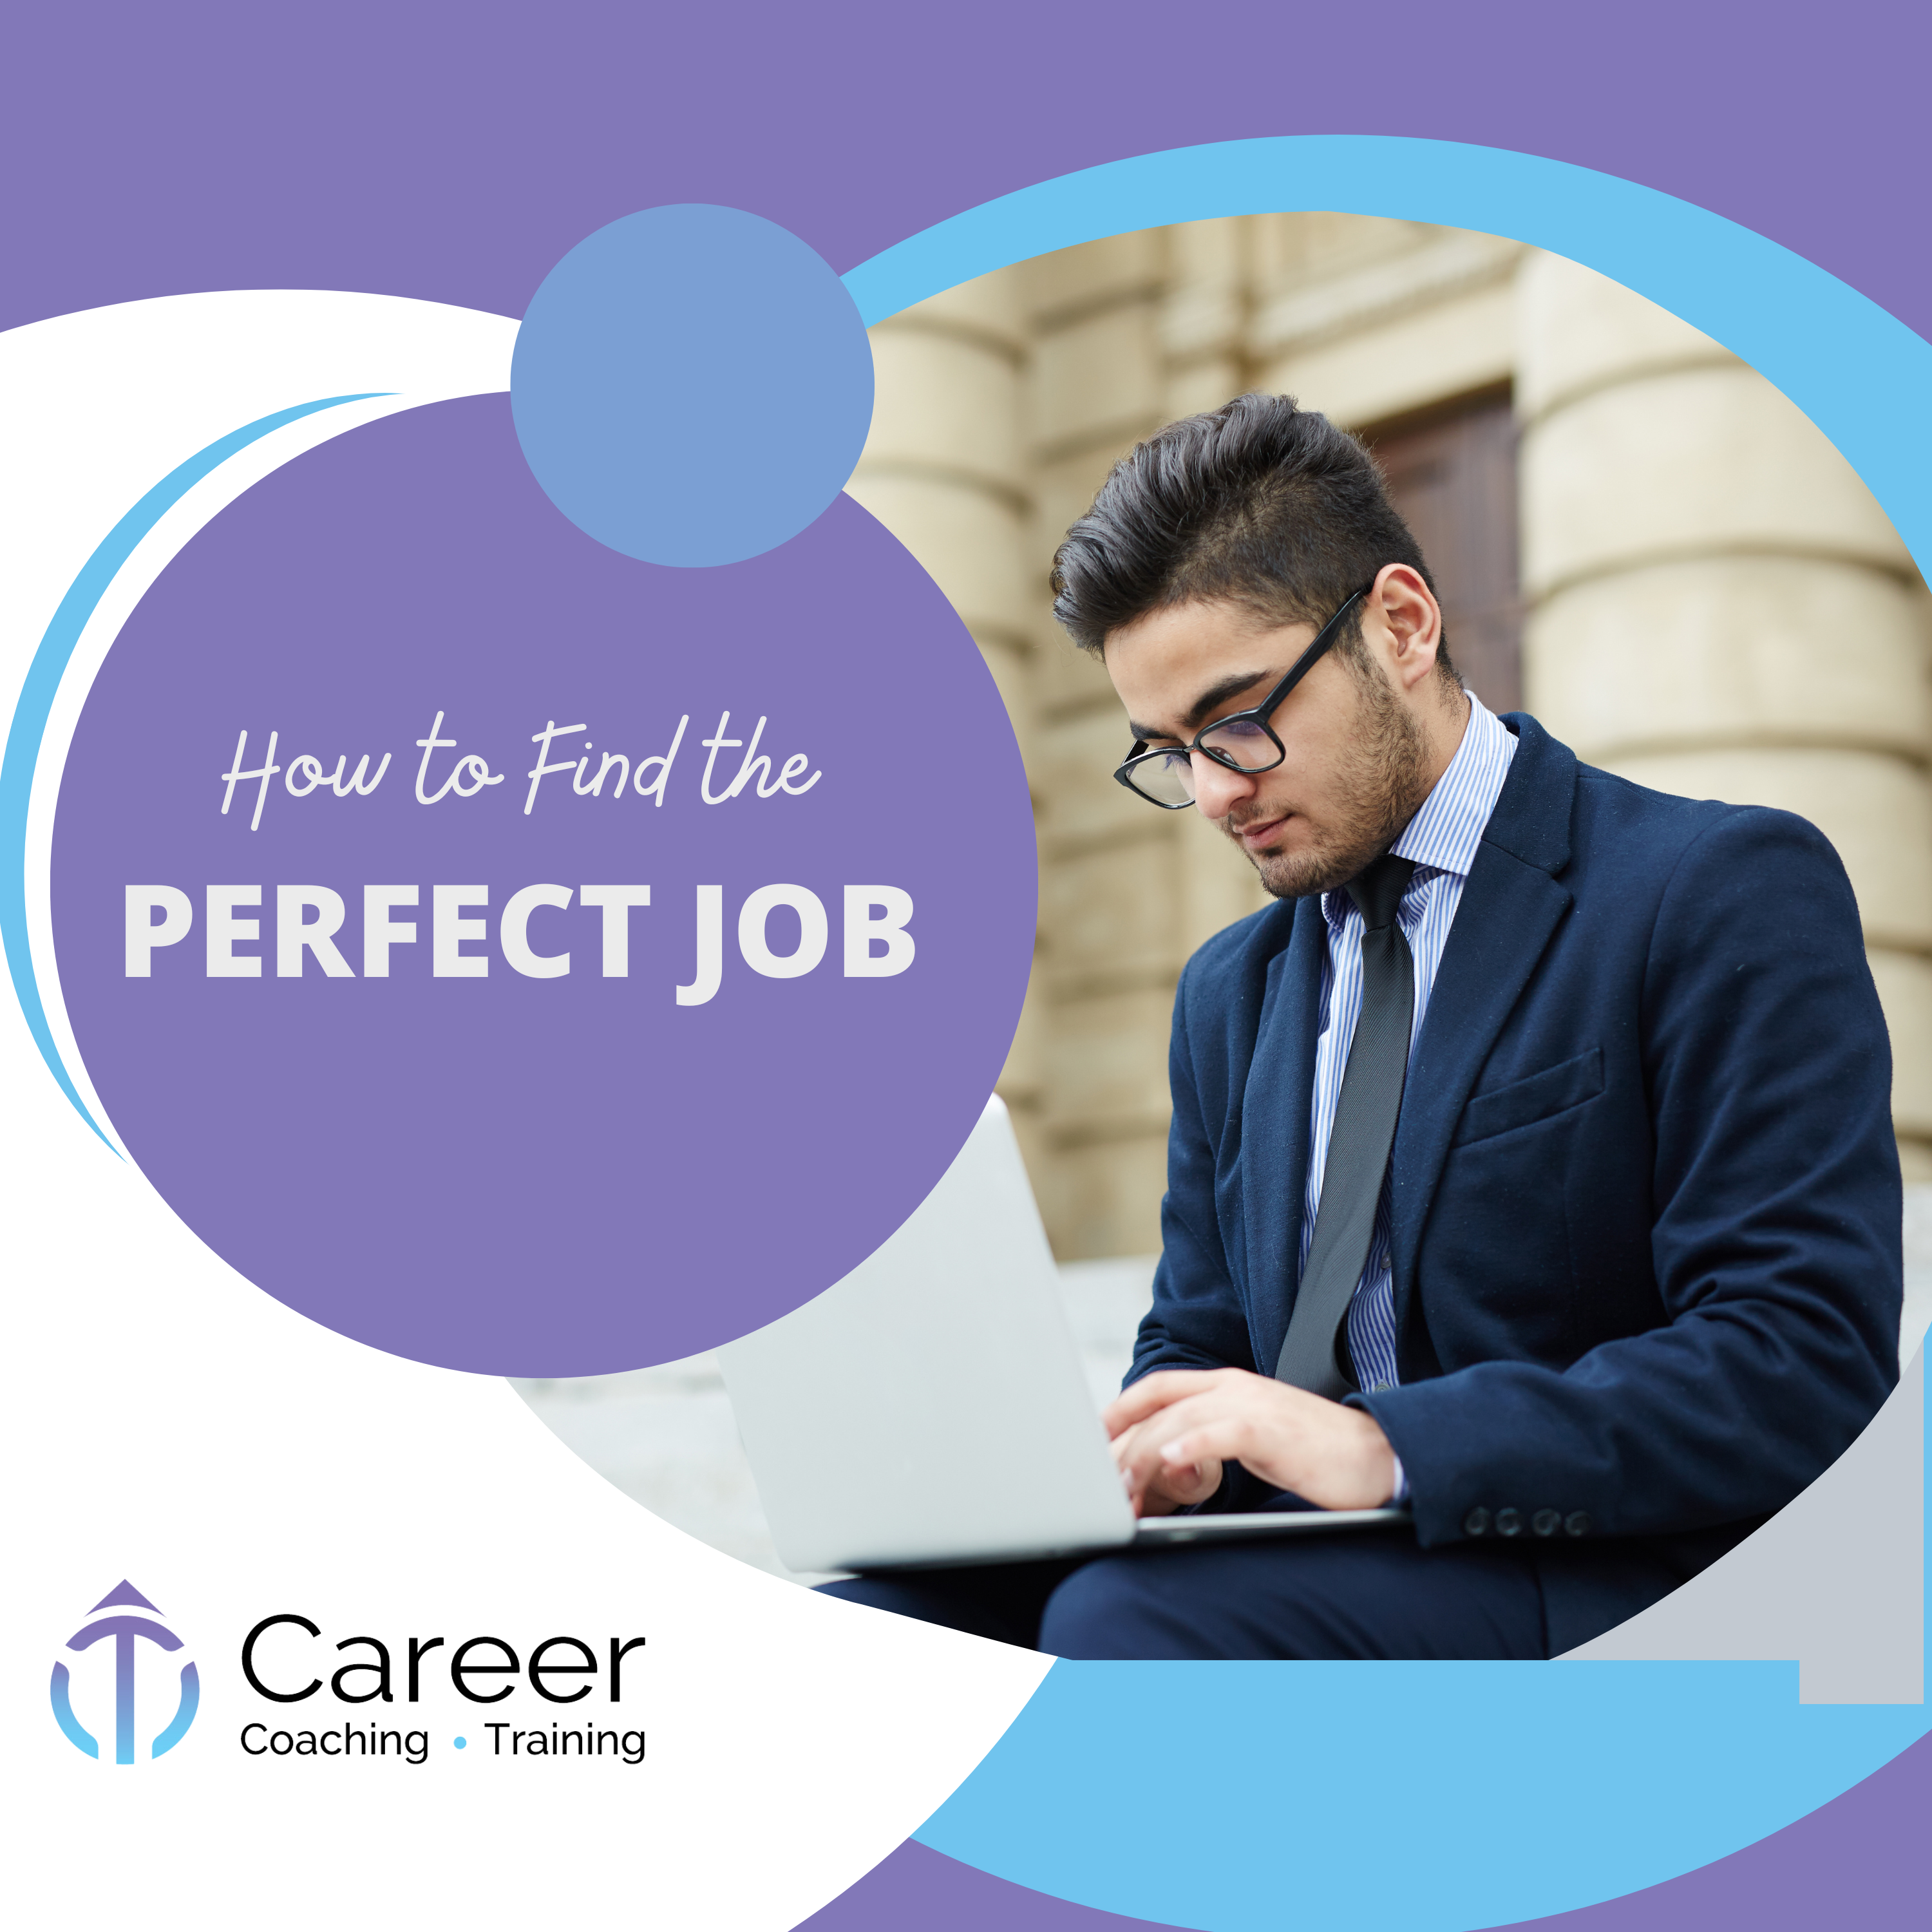 How to Find the Perfect Job